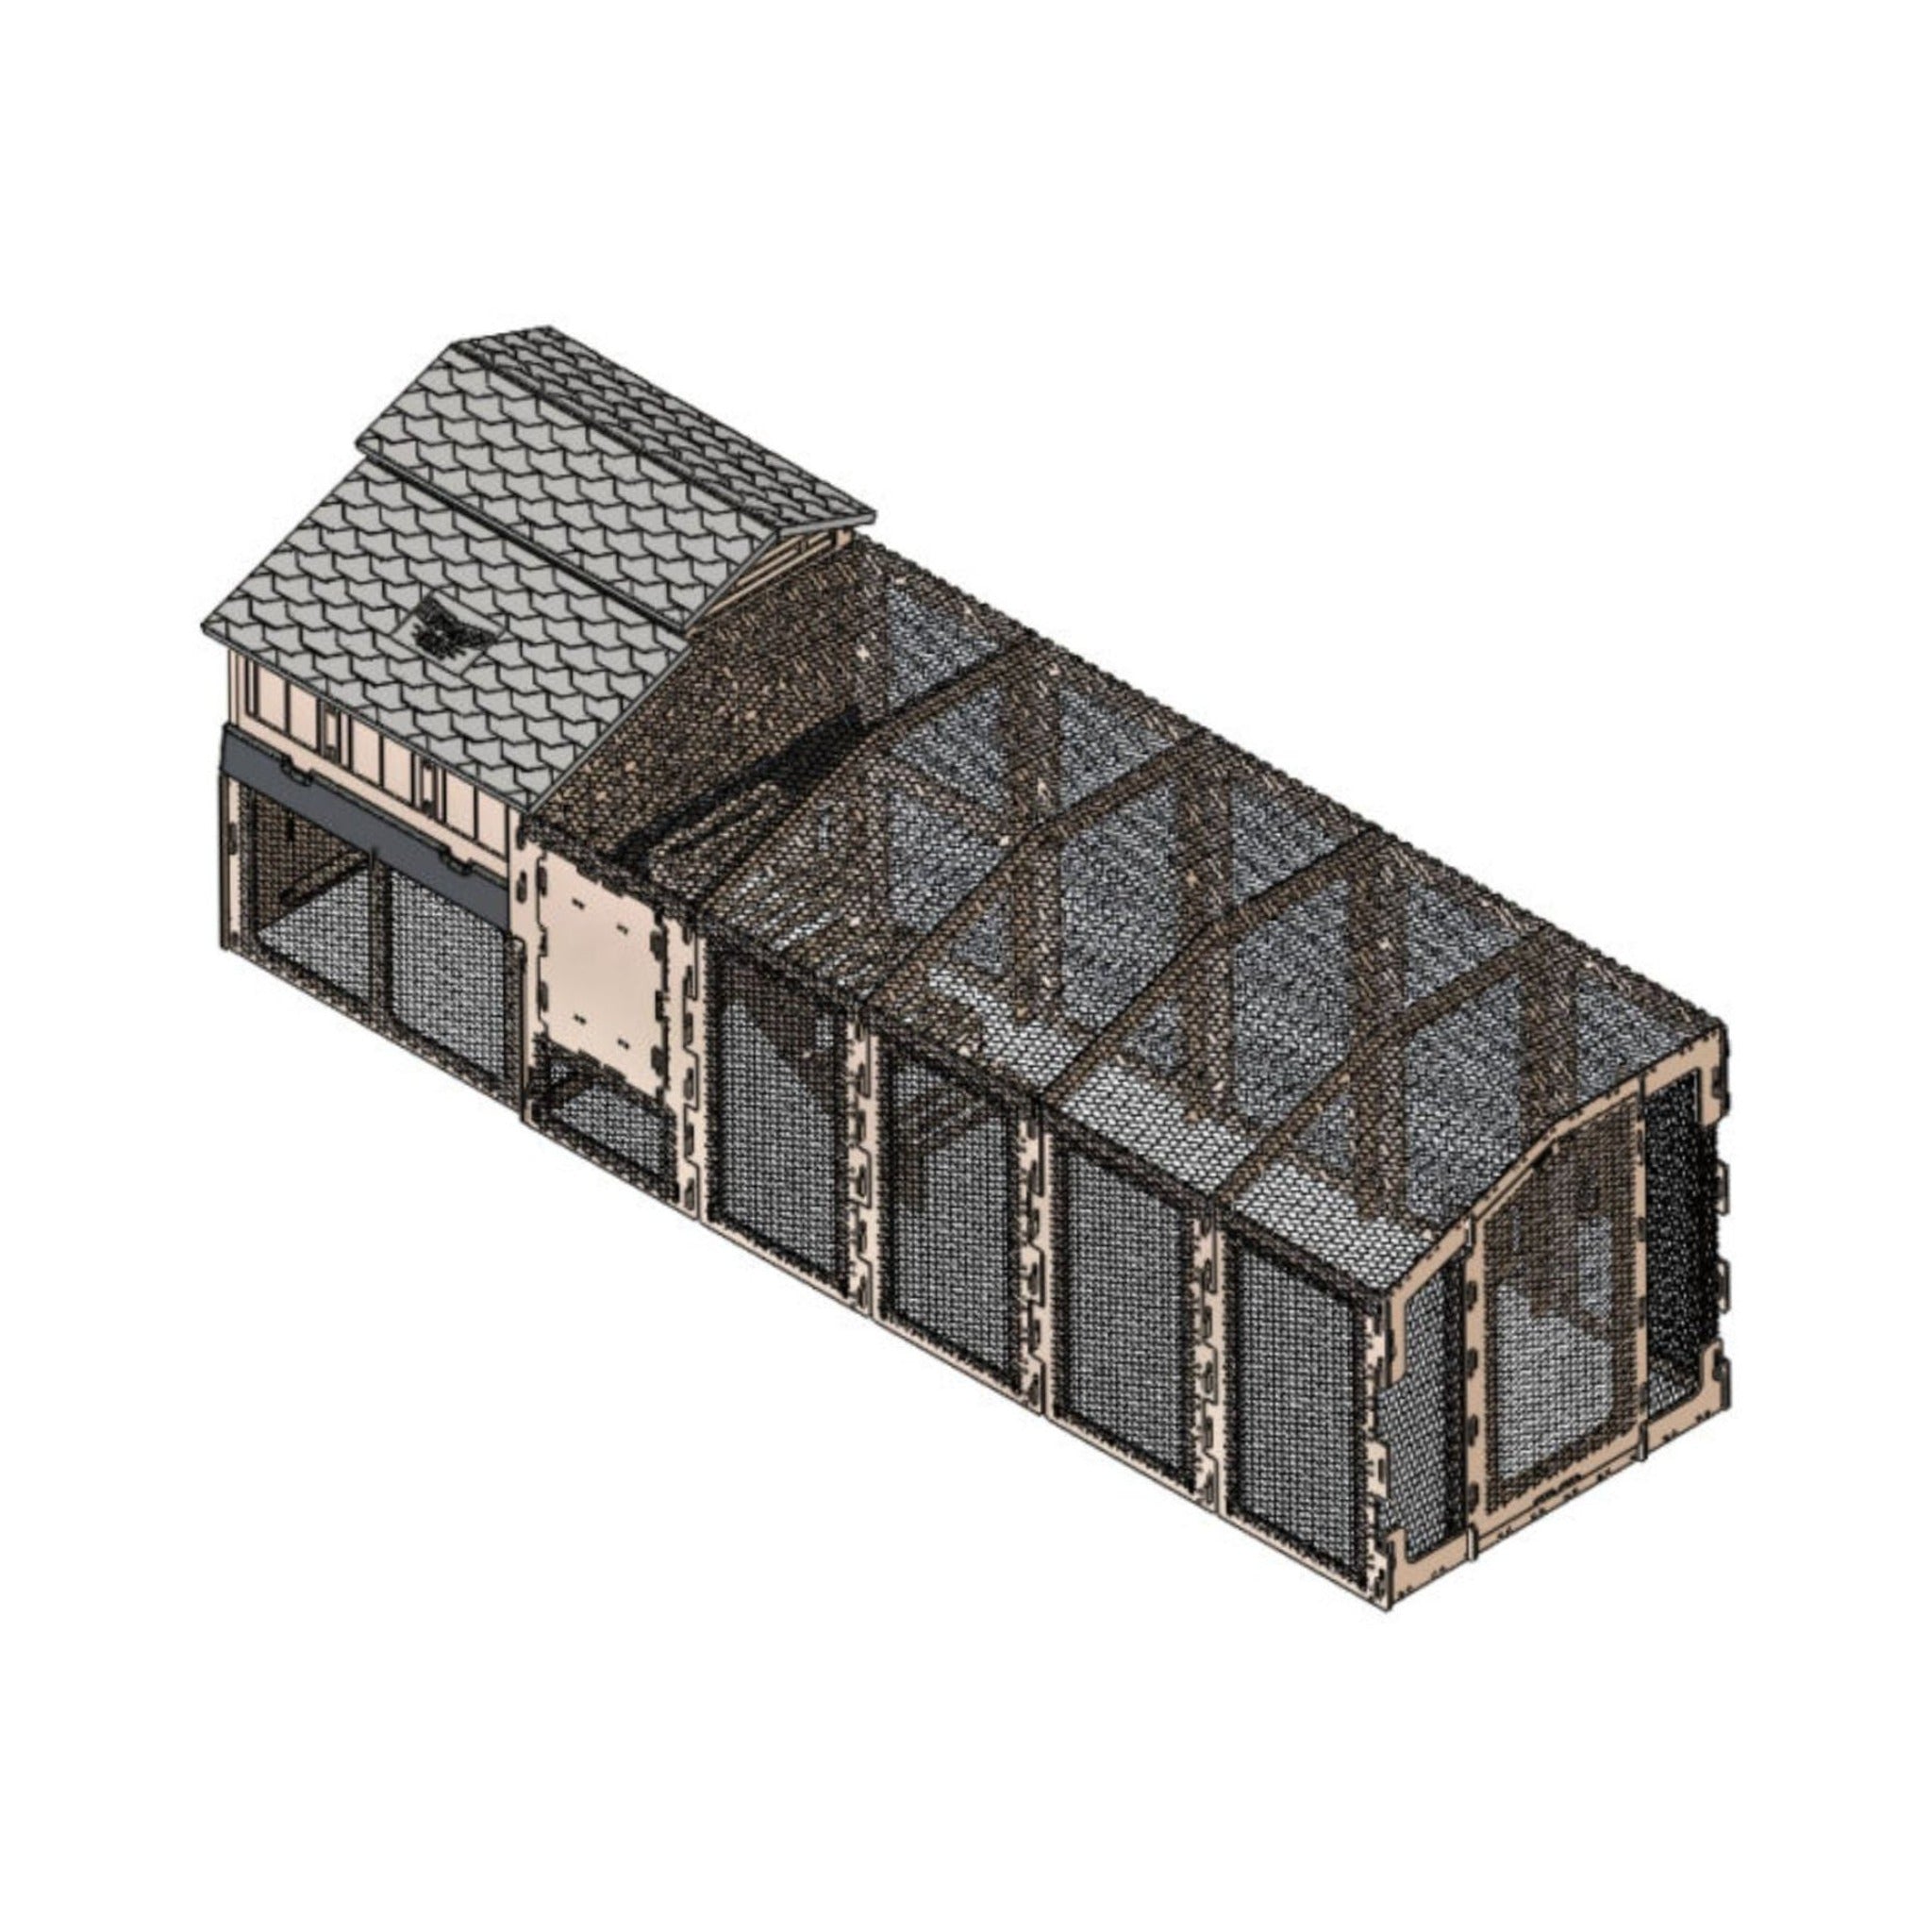 Hatching Time 3D rendering of Standard Formex Chicken coop extension kit. Kit shows longer chicken coop run and chicken coop on top of stand and stairs addition. Without chicken wire